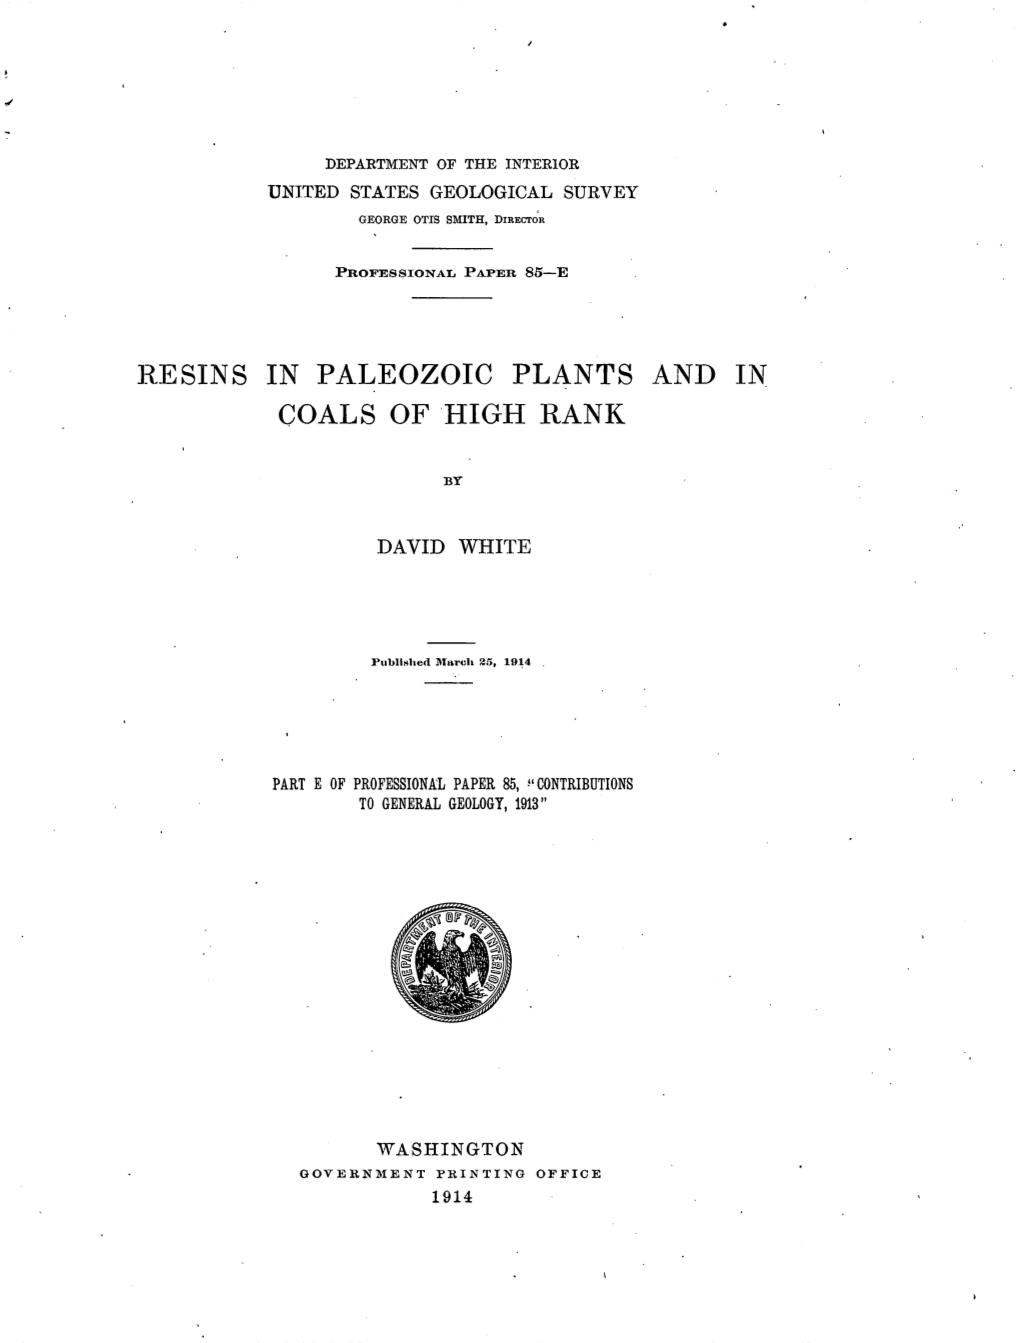 Llesins in PALEOZOIC PLANTS and in COALS of ·HIGH RANK